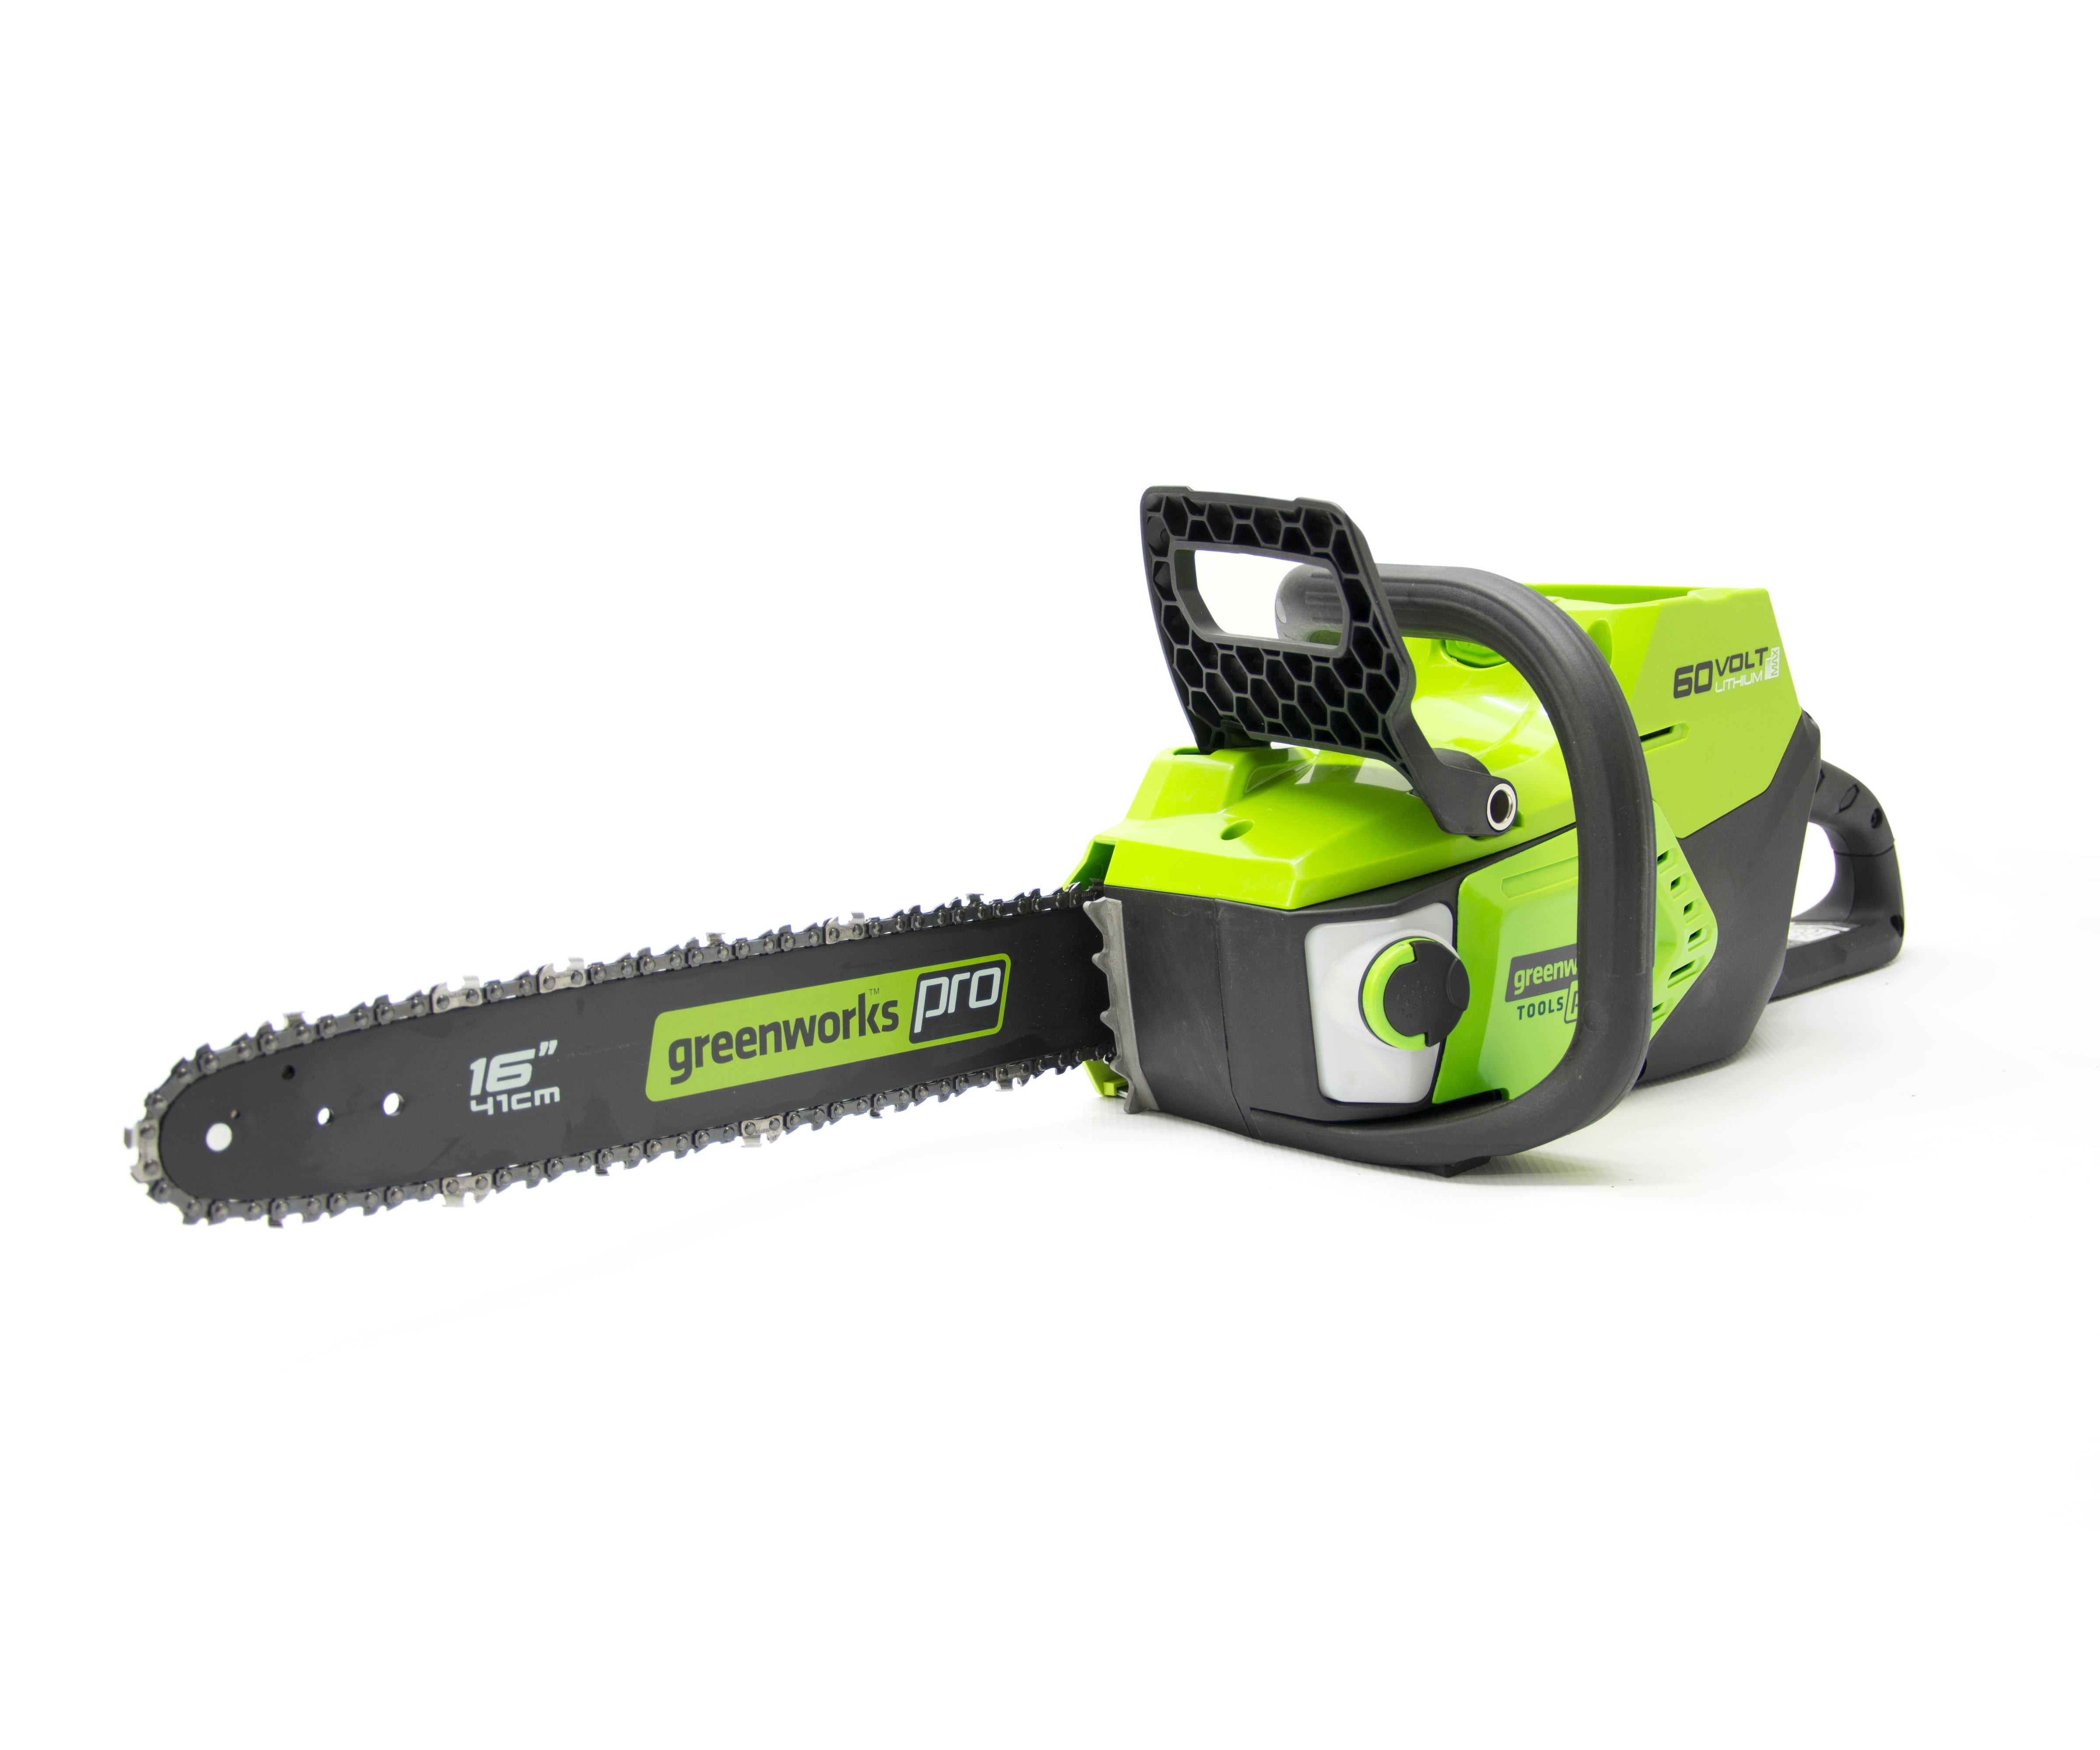  GD60CS40 60V Chainsaw (Tool Only) - Garden Equipment Review